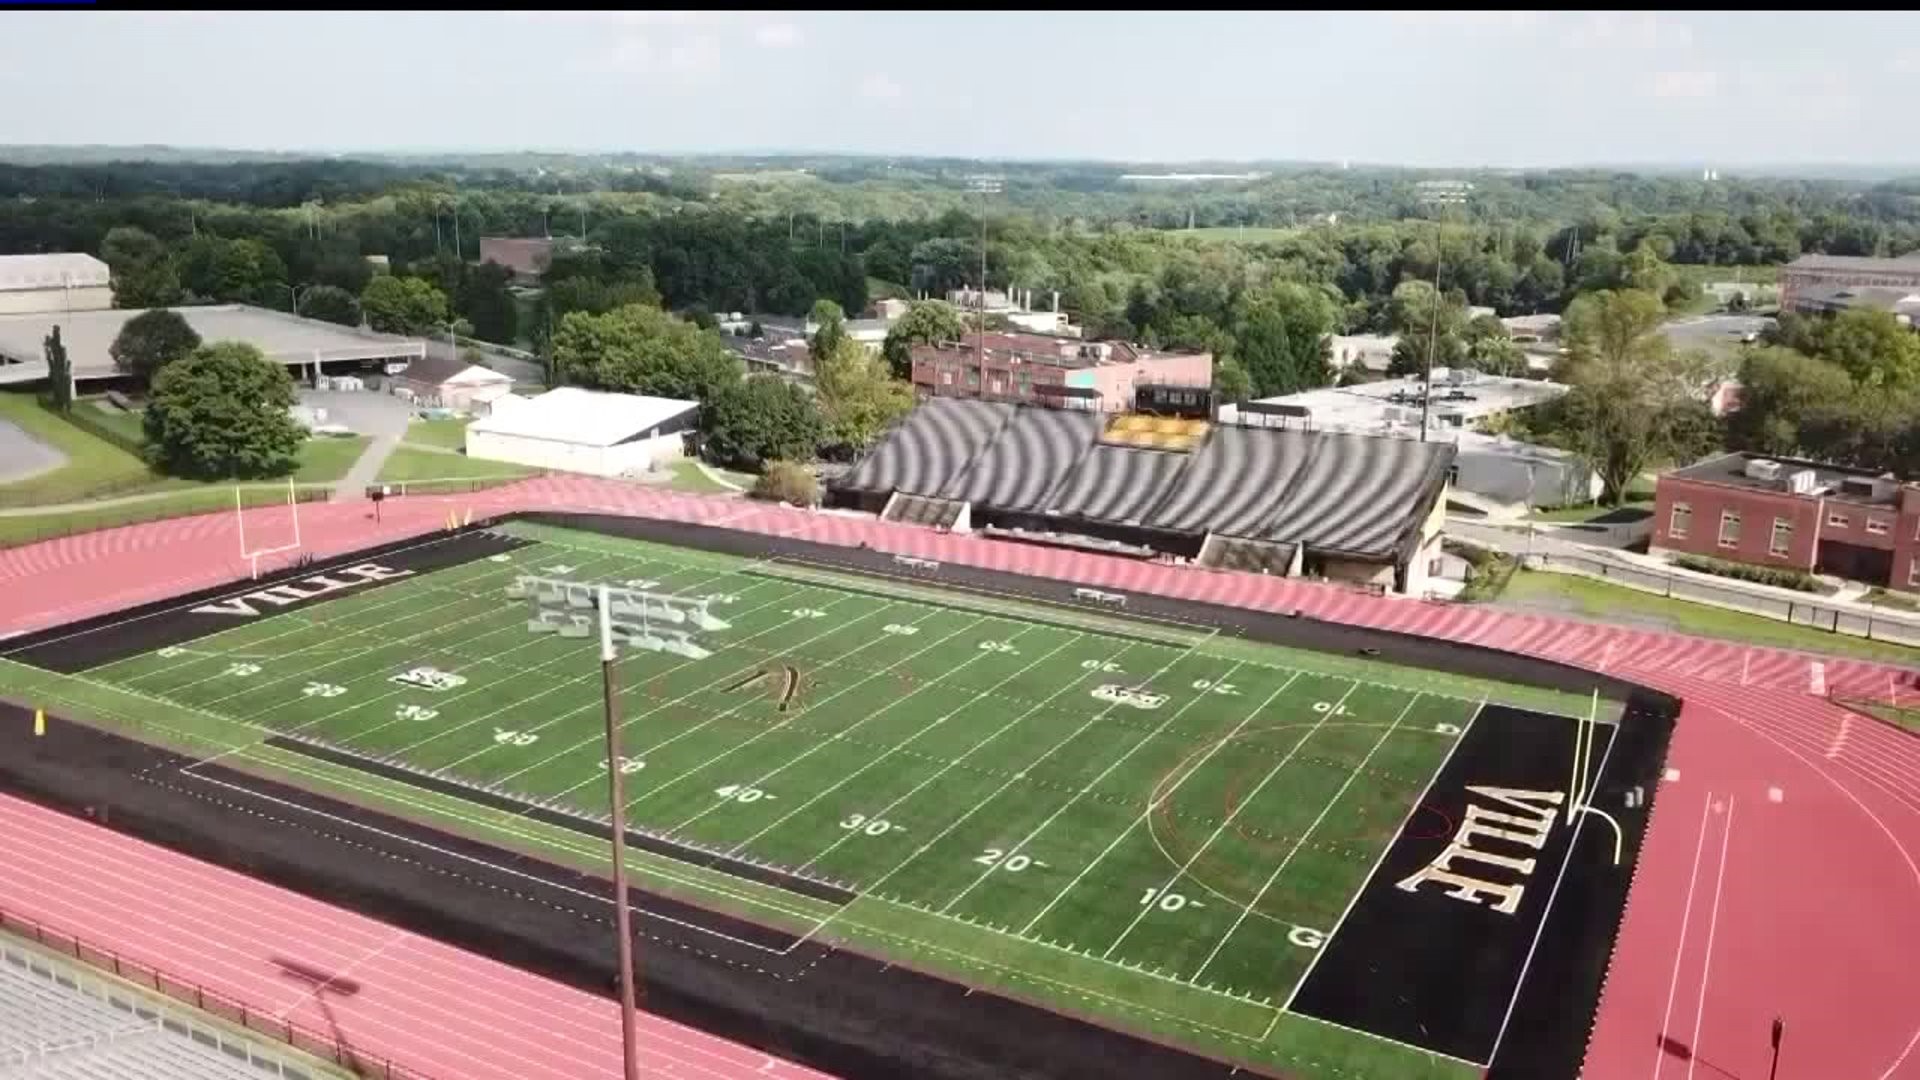 New and exciting changes on and off the field at Millersville